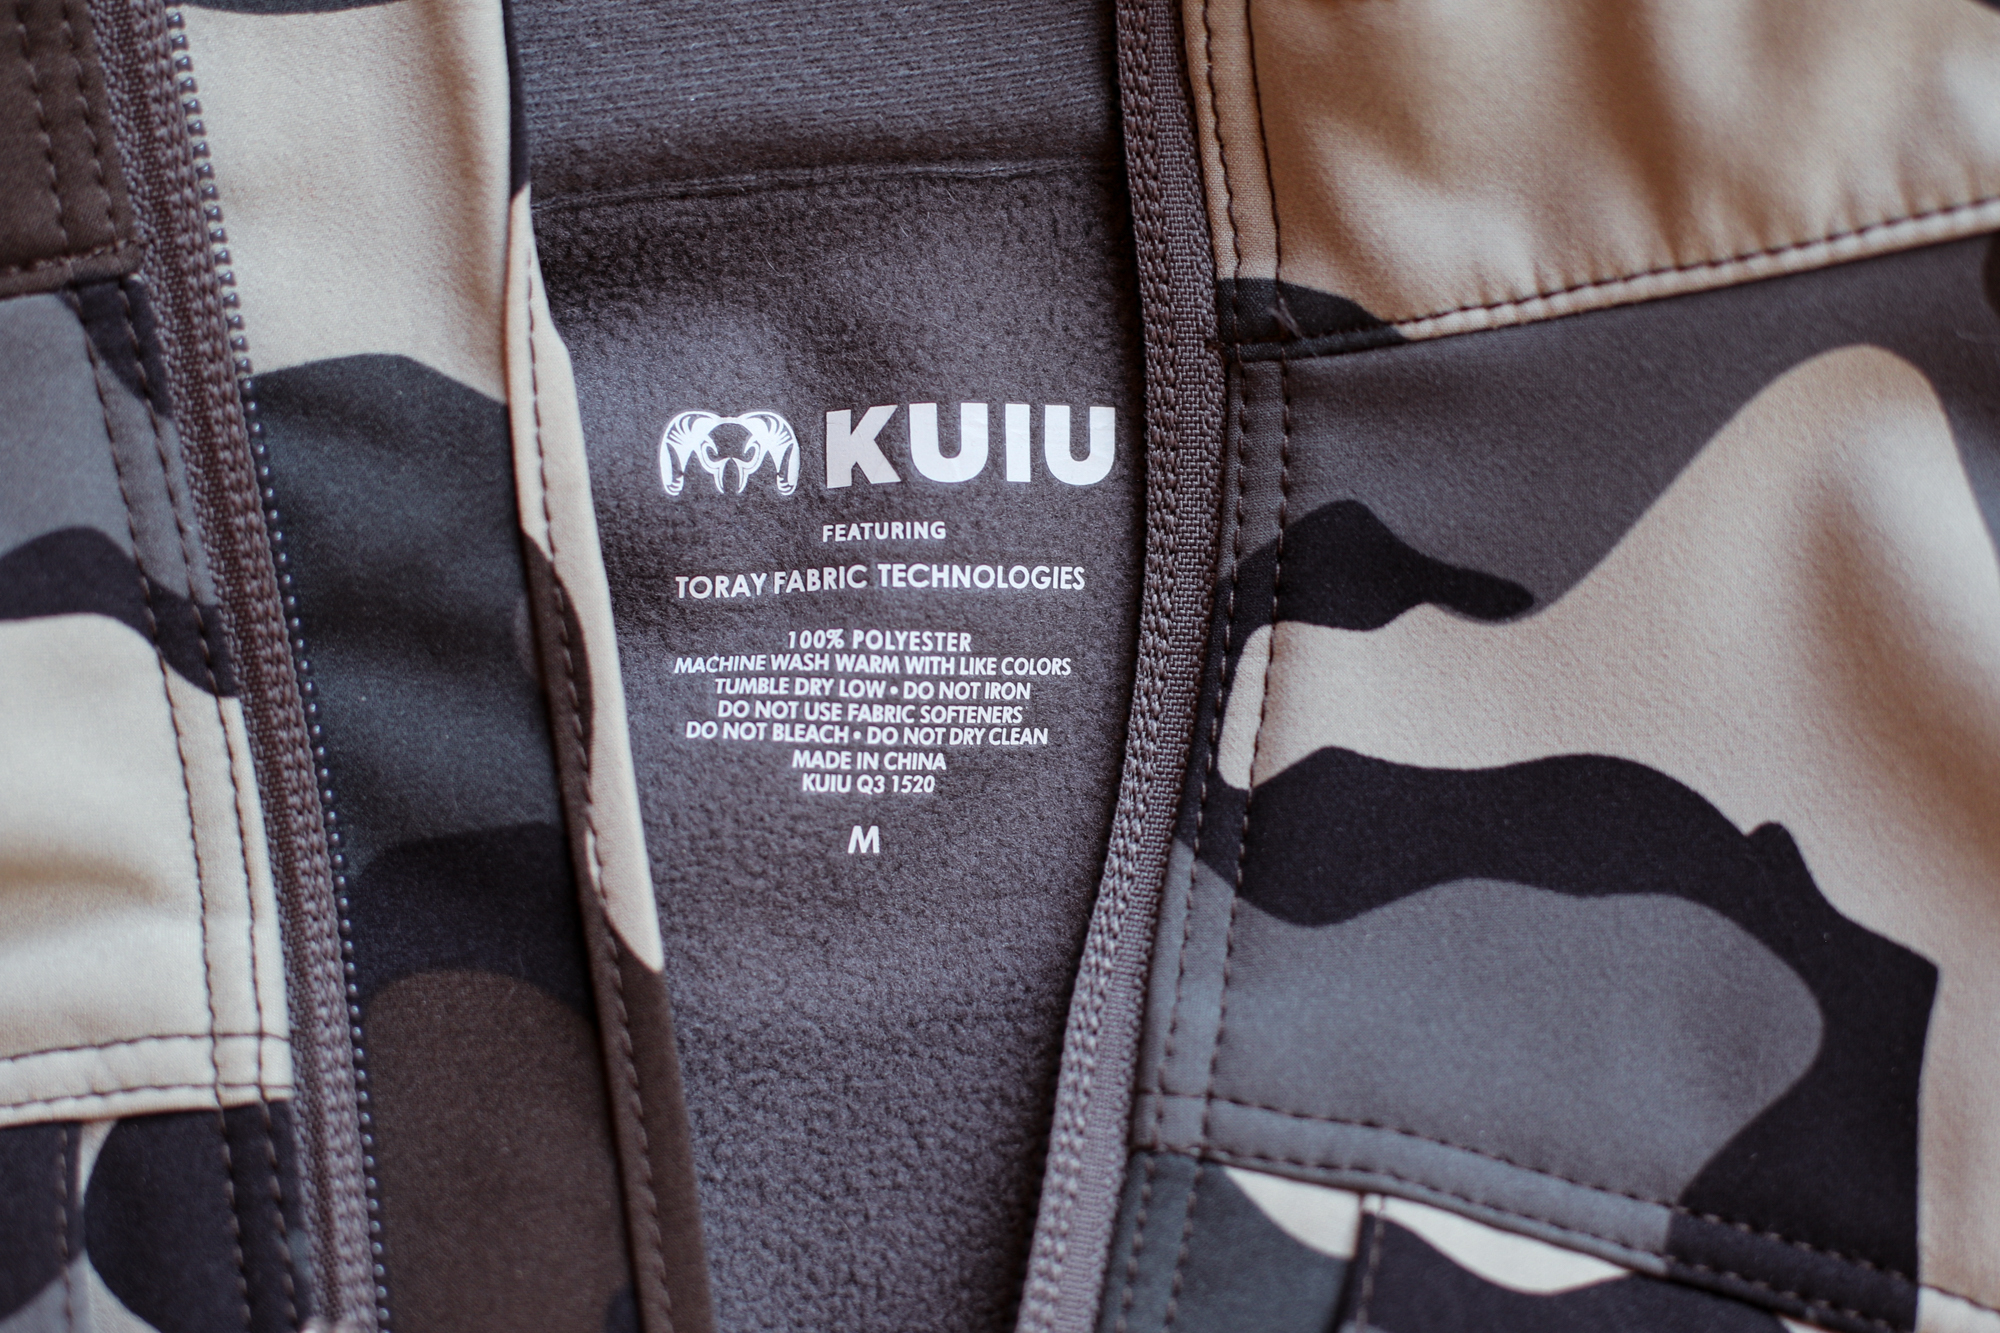 Kuiu camo is made from a Japanese fabric and sewn overseas.